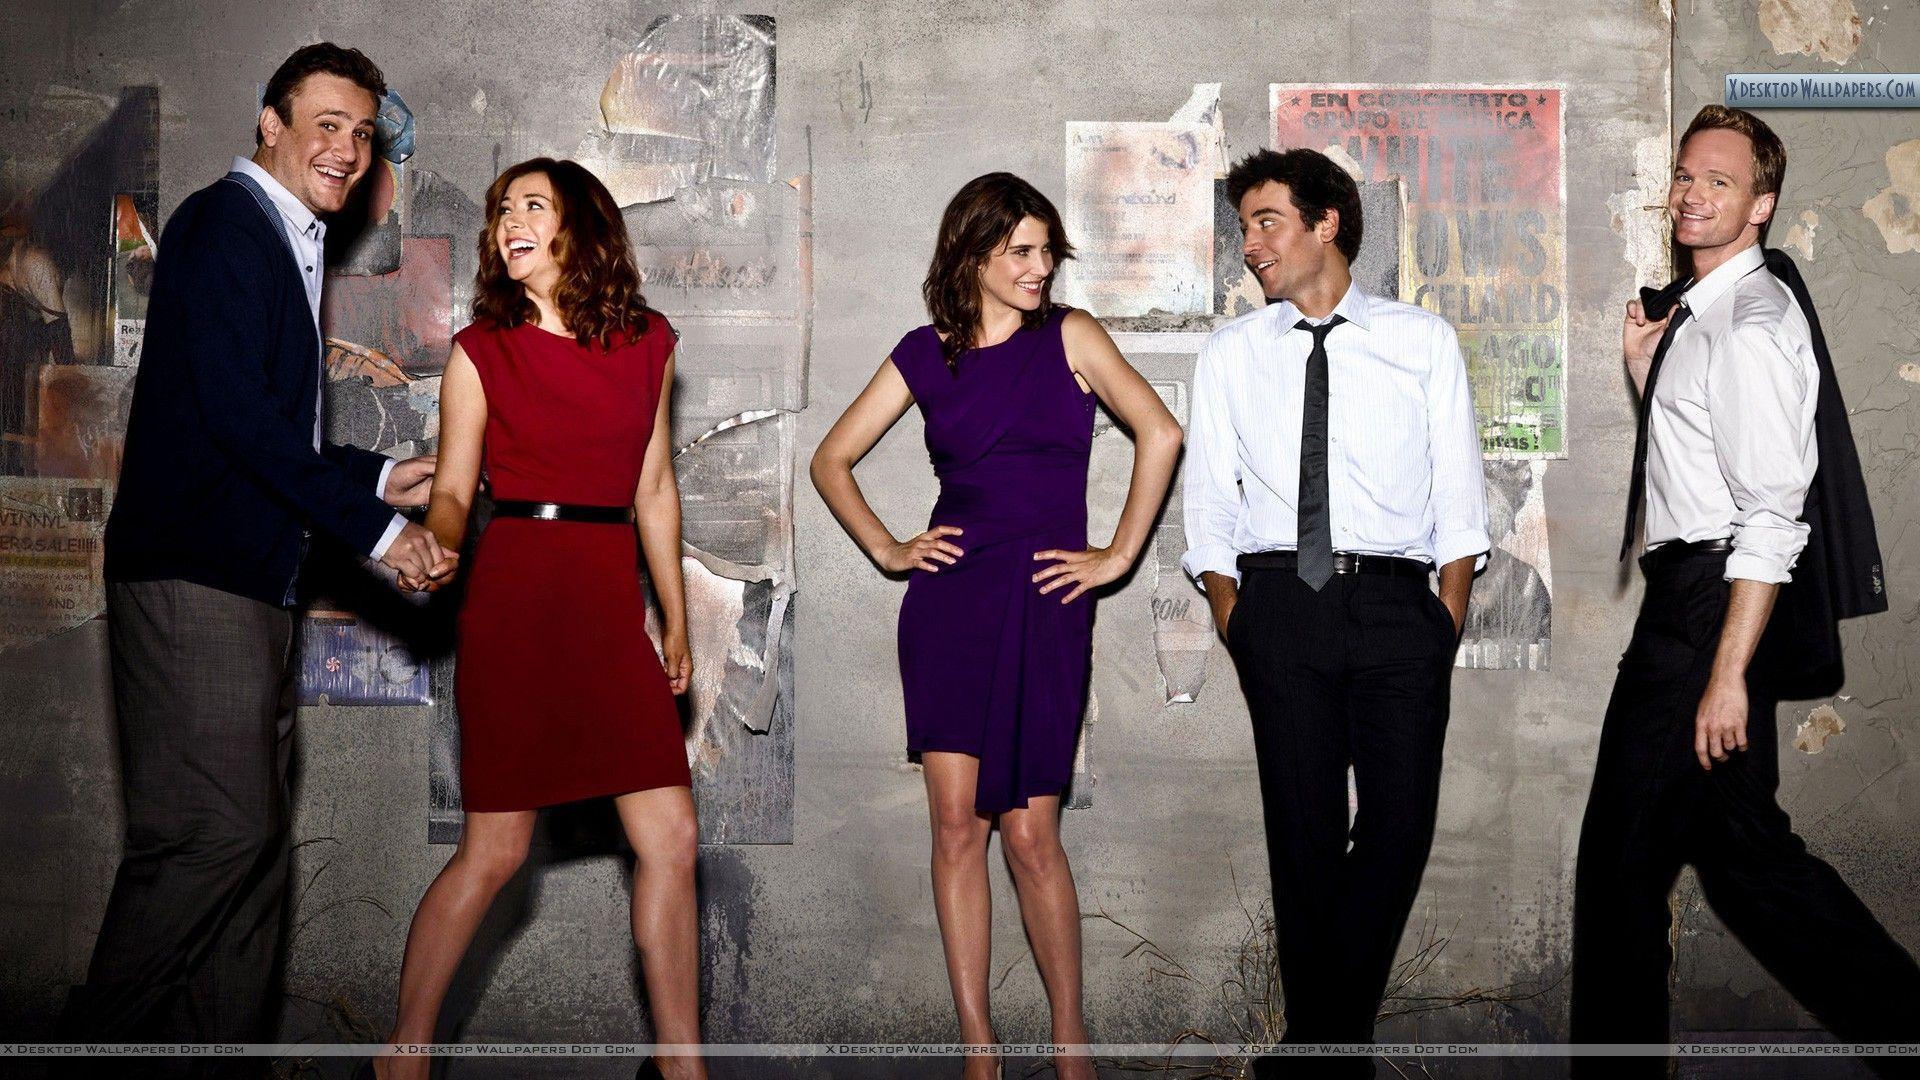 How I Met Your Mother Wallpapers, Photos & Image in HD